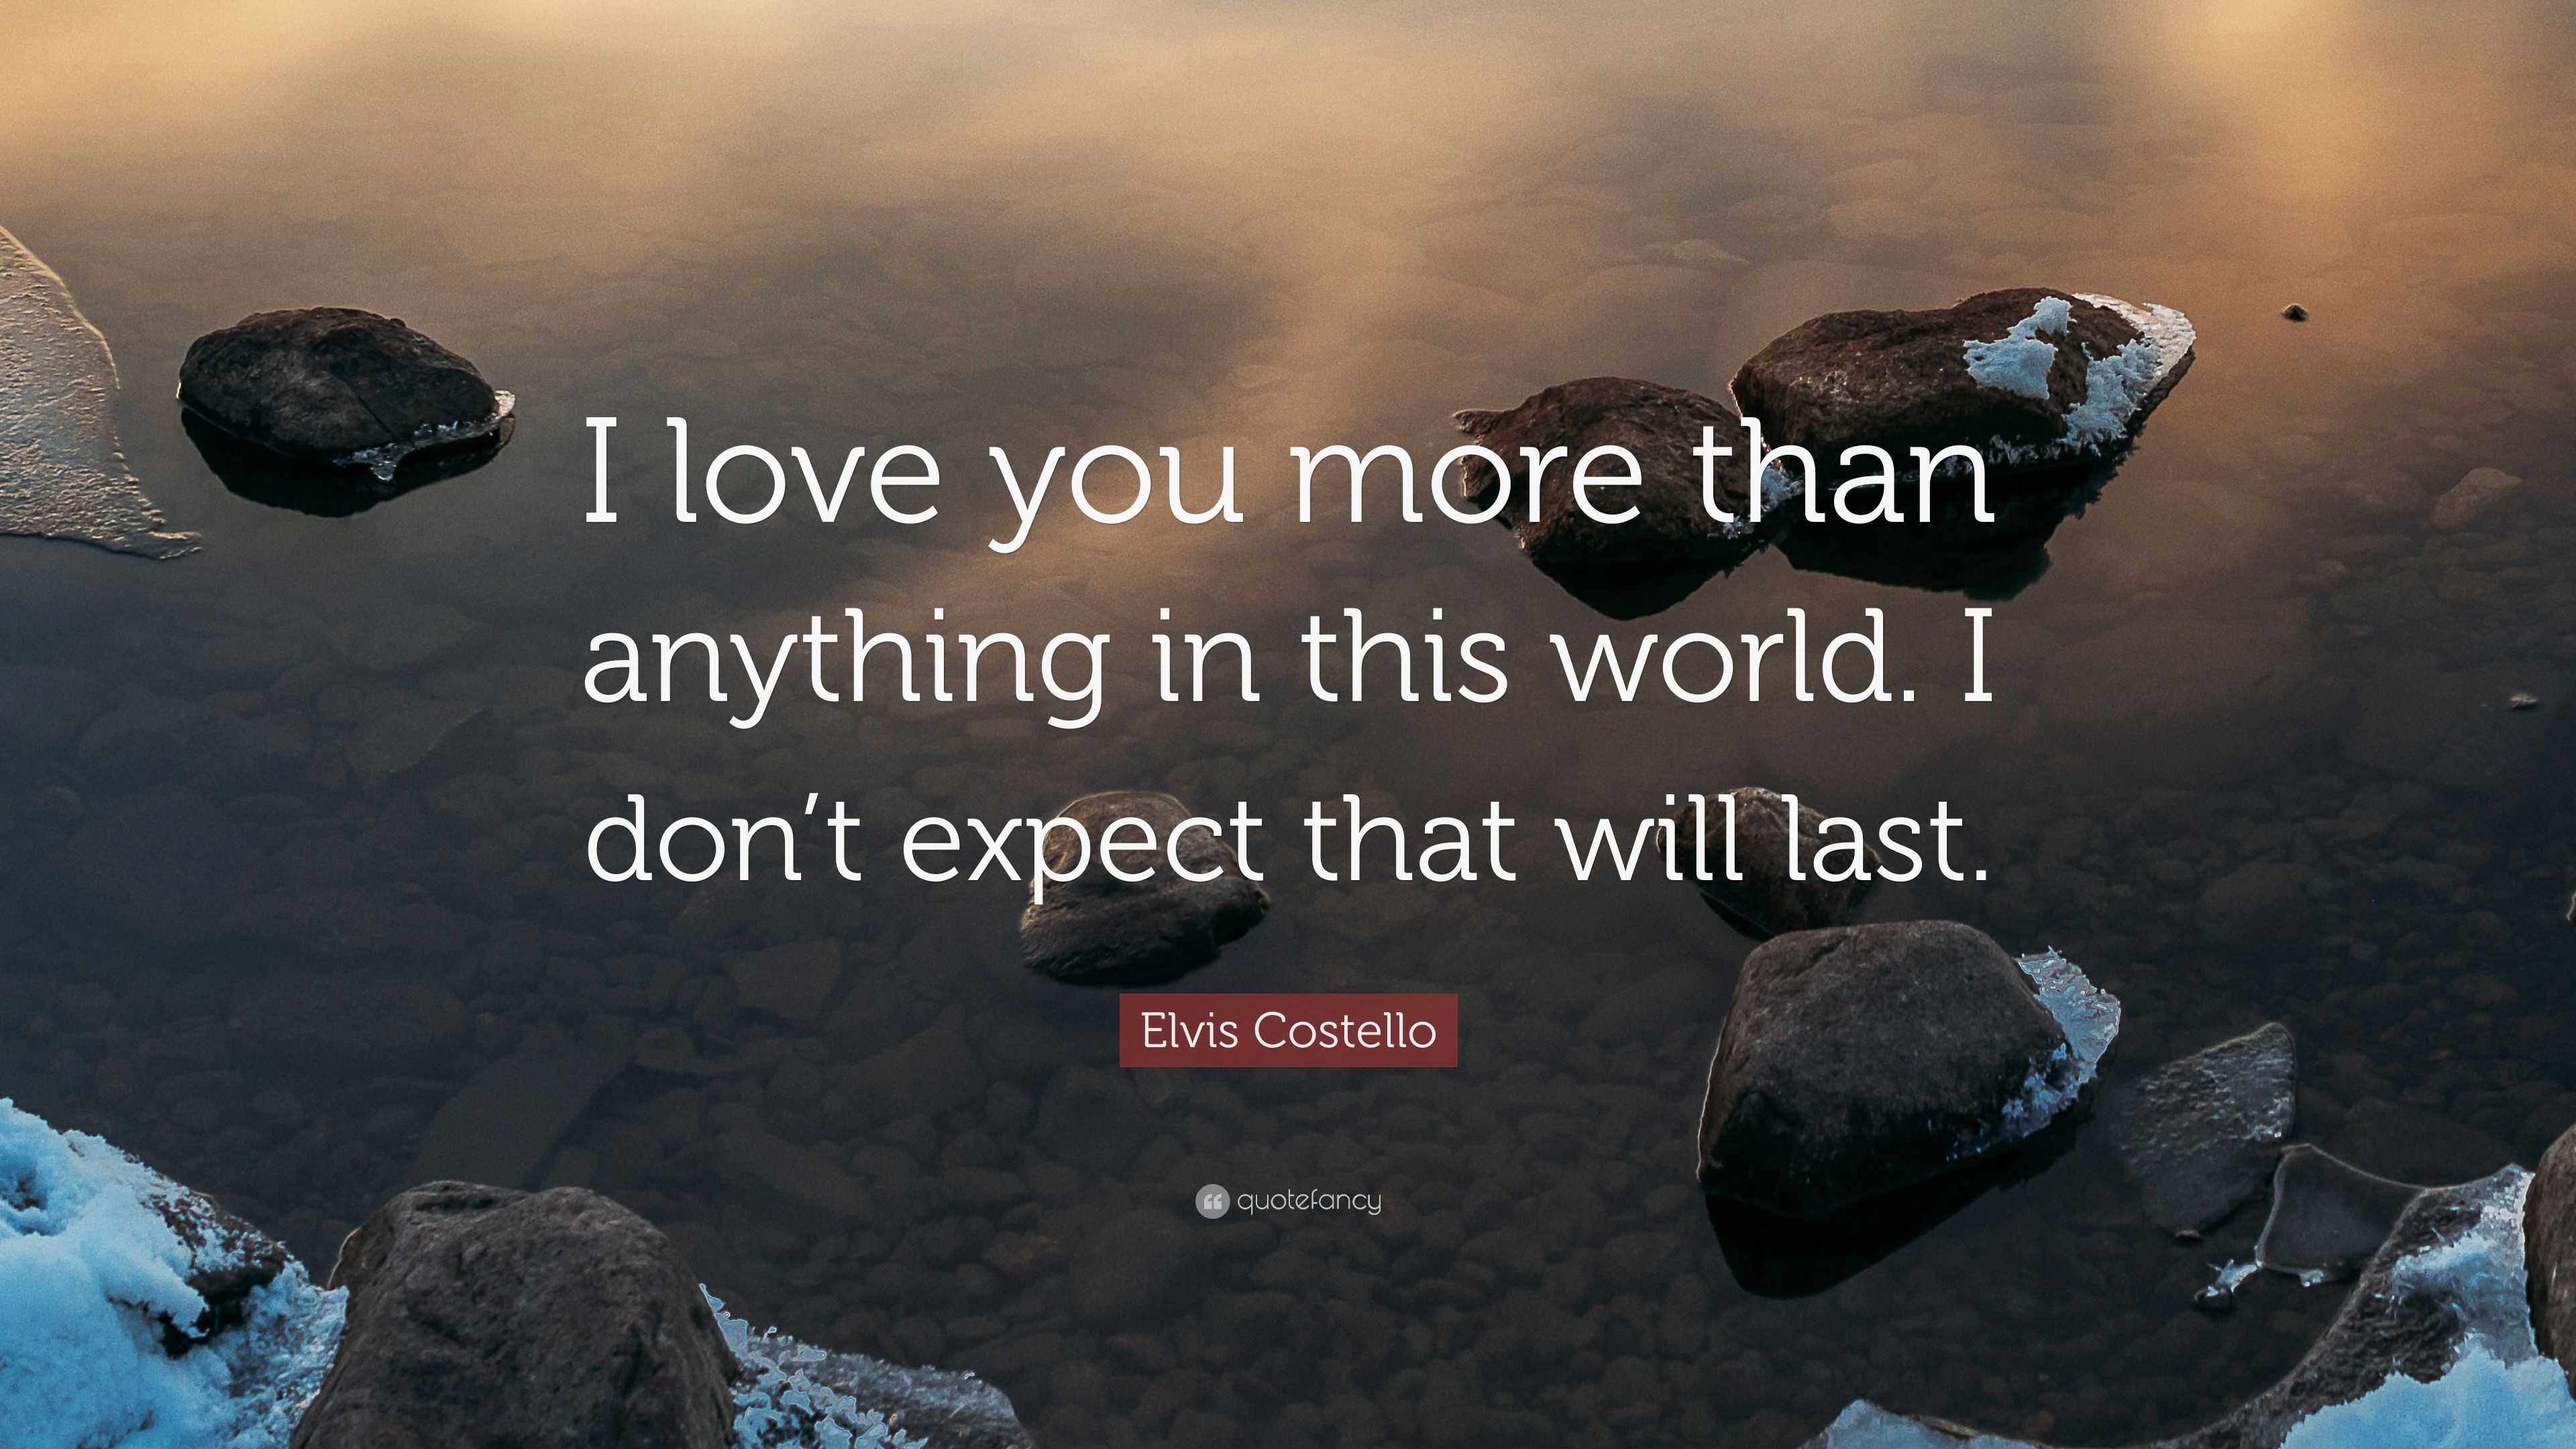 Elvis Costello Quote “I love you more than anything in